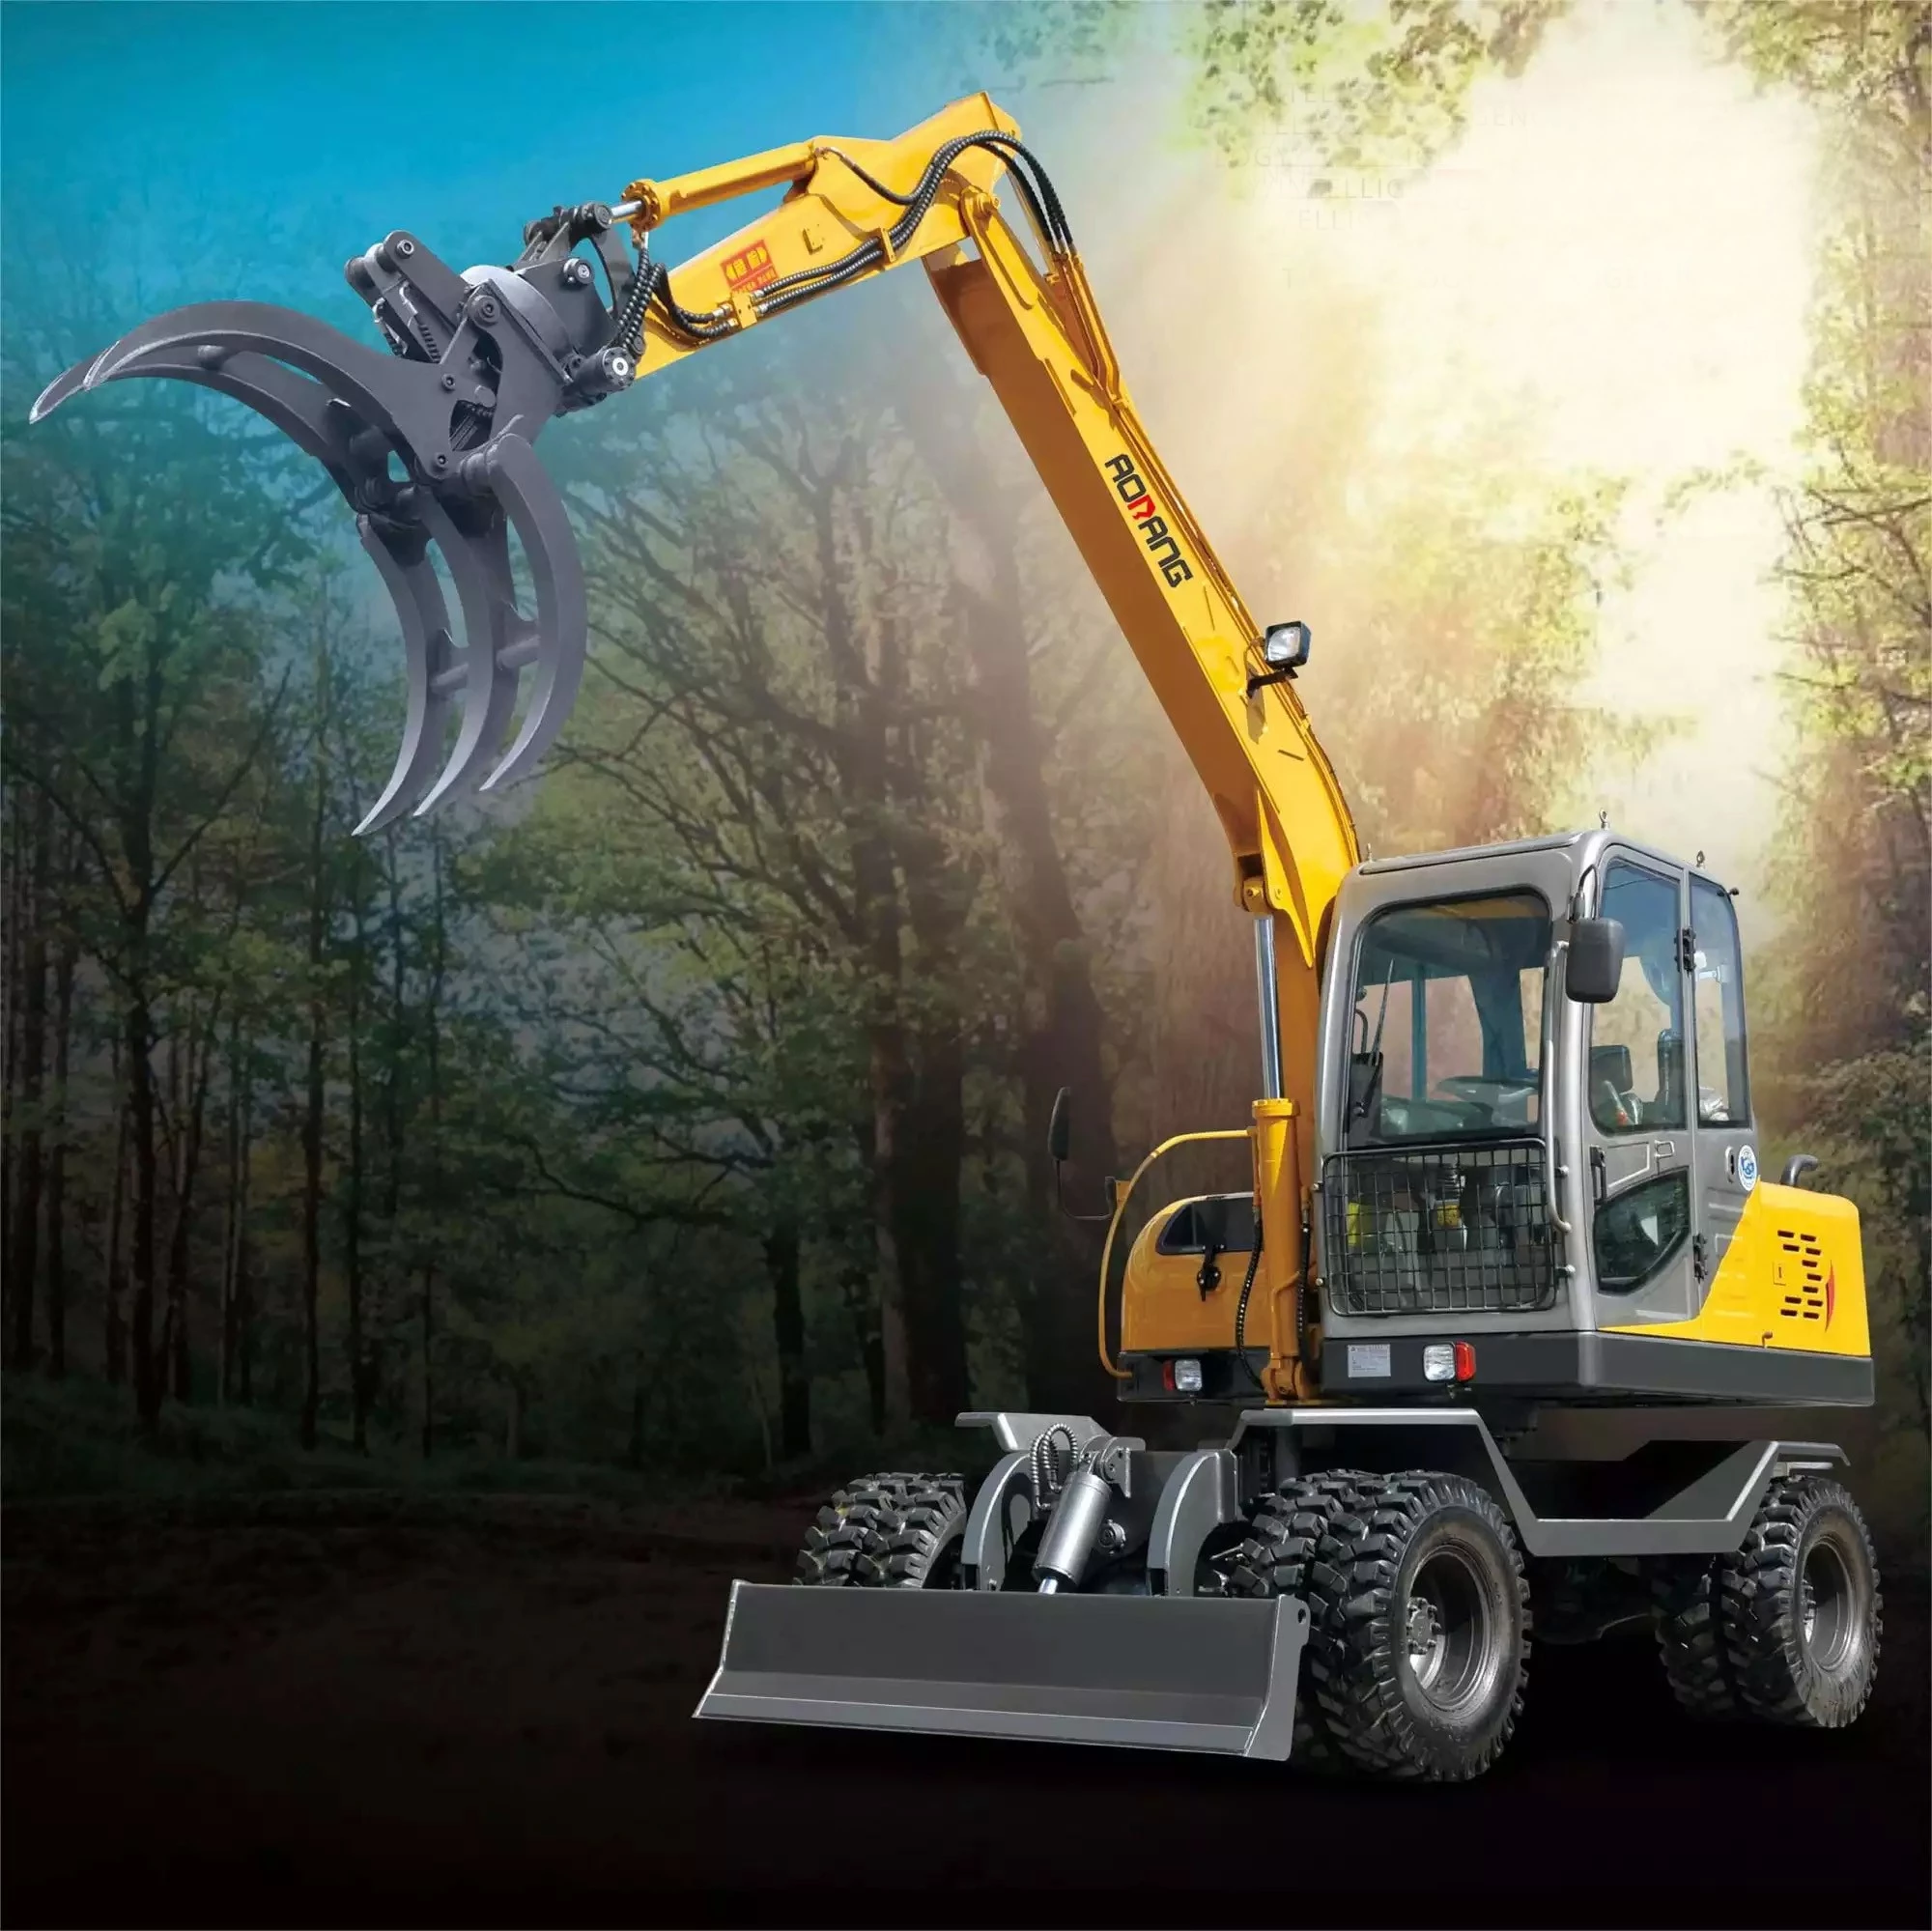 The Reasons for the Slow Steering of the Wheeled Type Grab Excavator